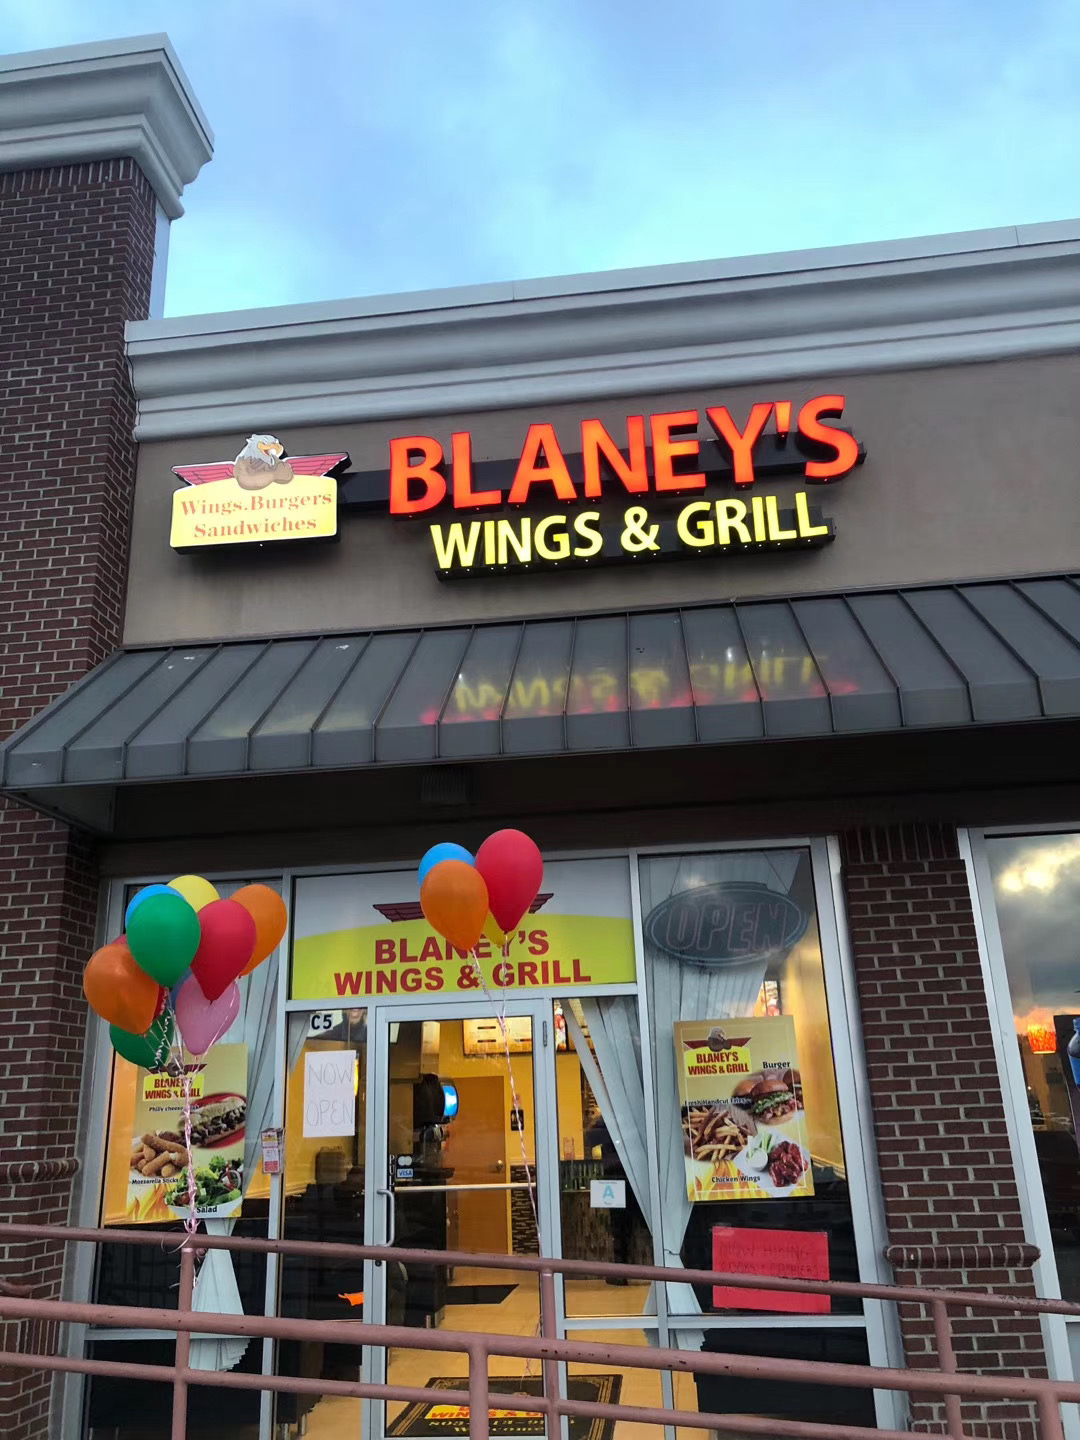 Blaney's Wings & Grill